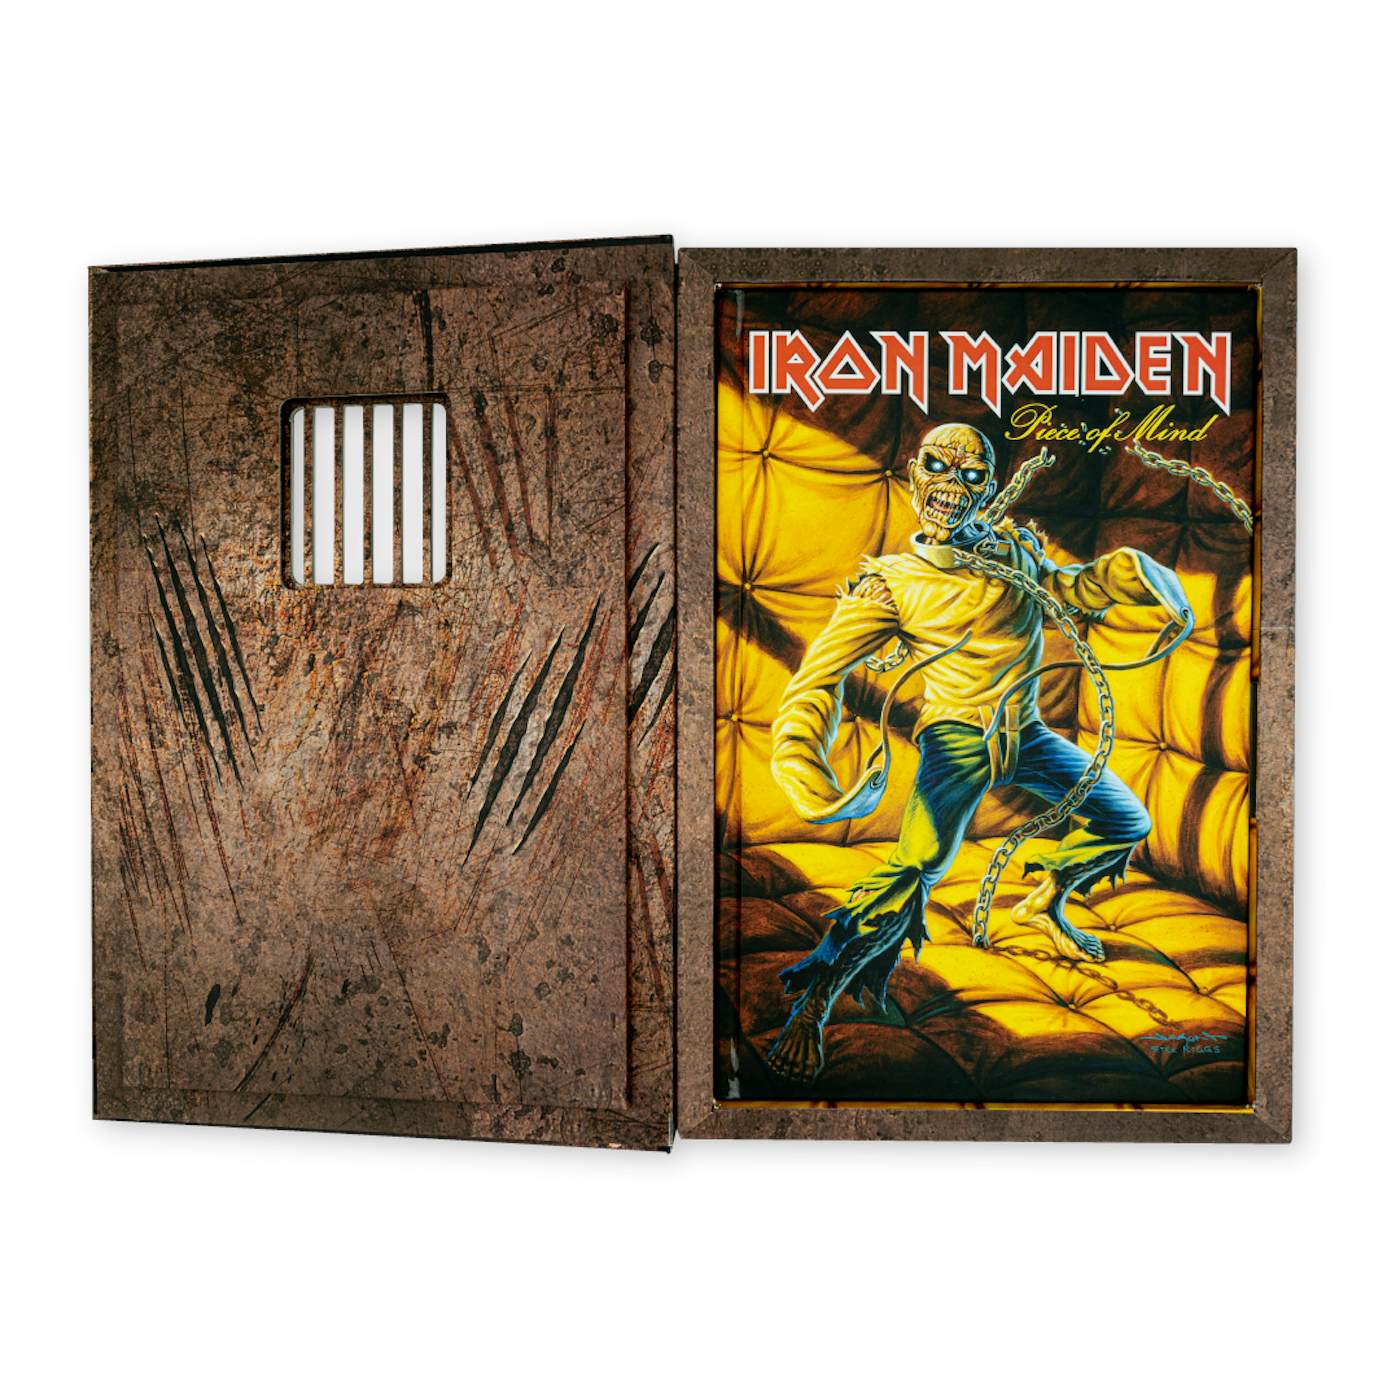 Iron Maiden Piece Of Mind - Deluxe Edition $150.00